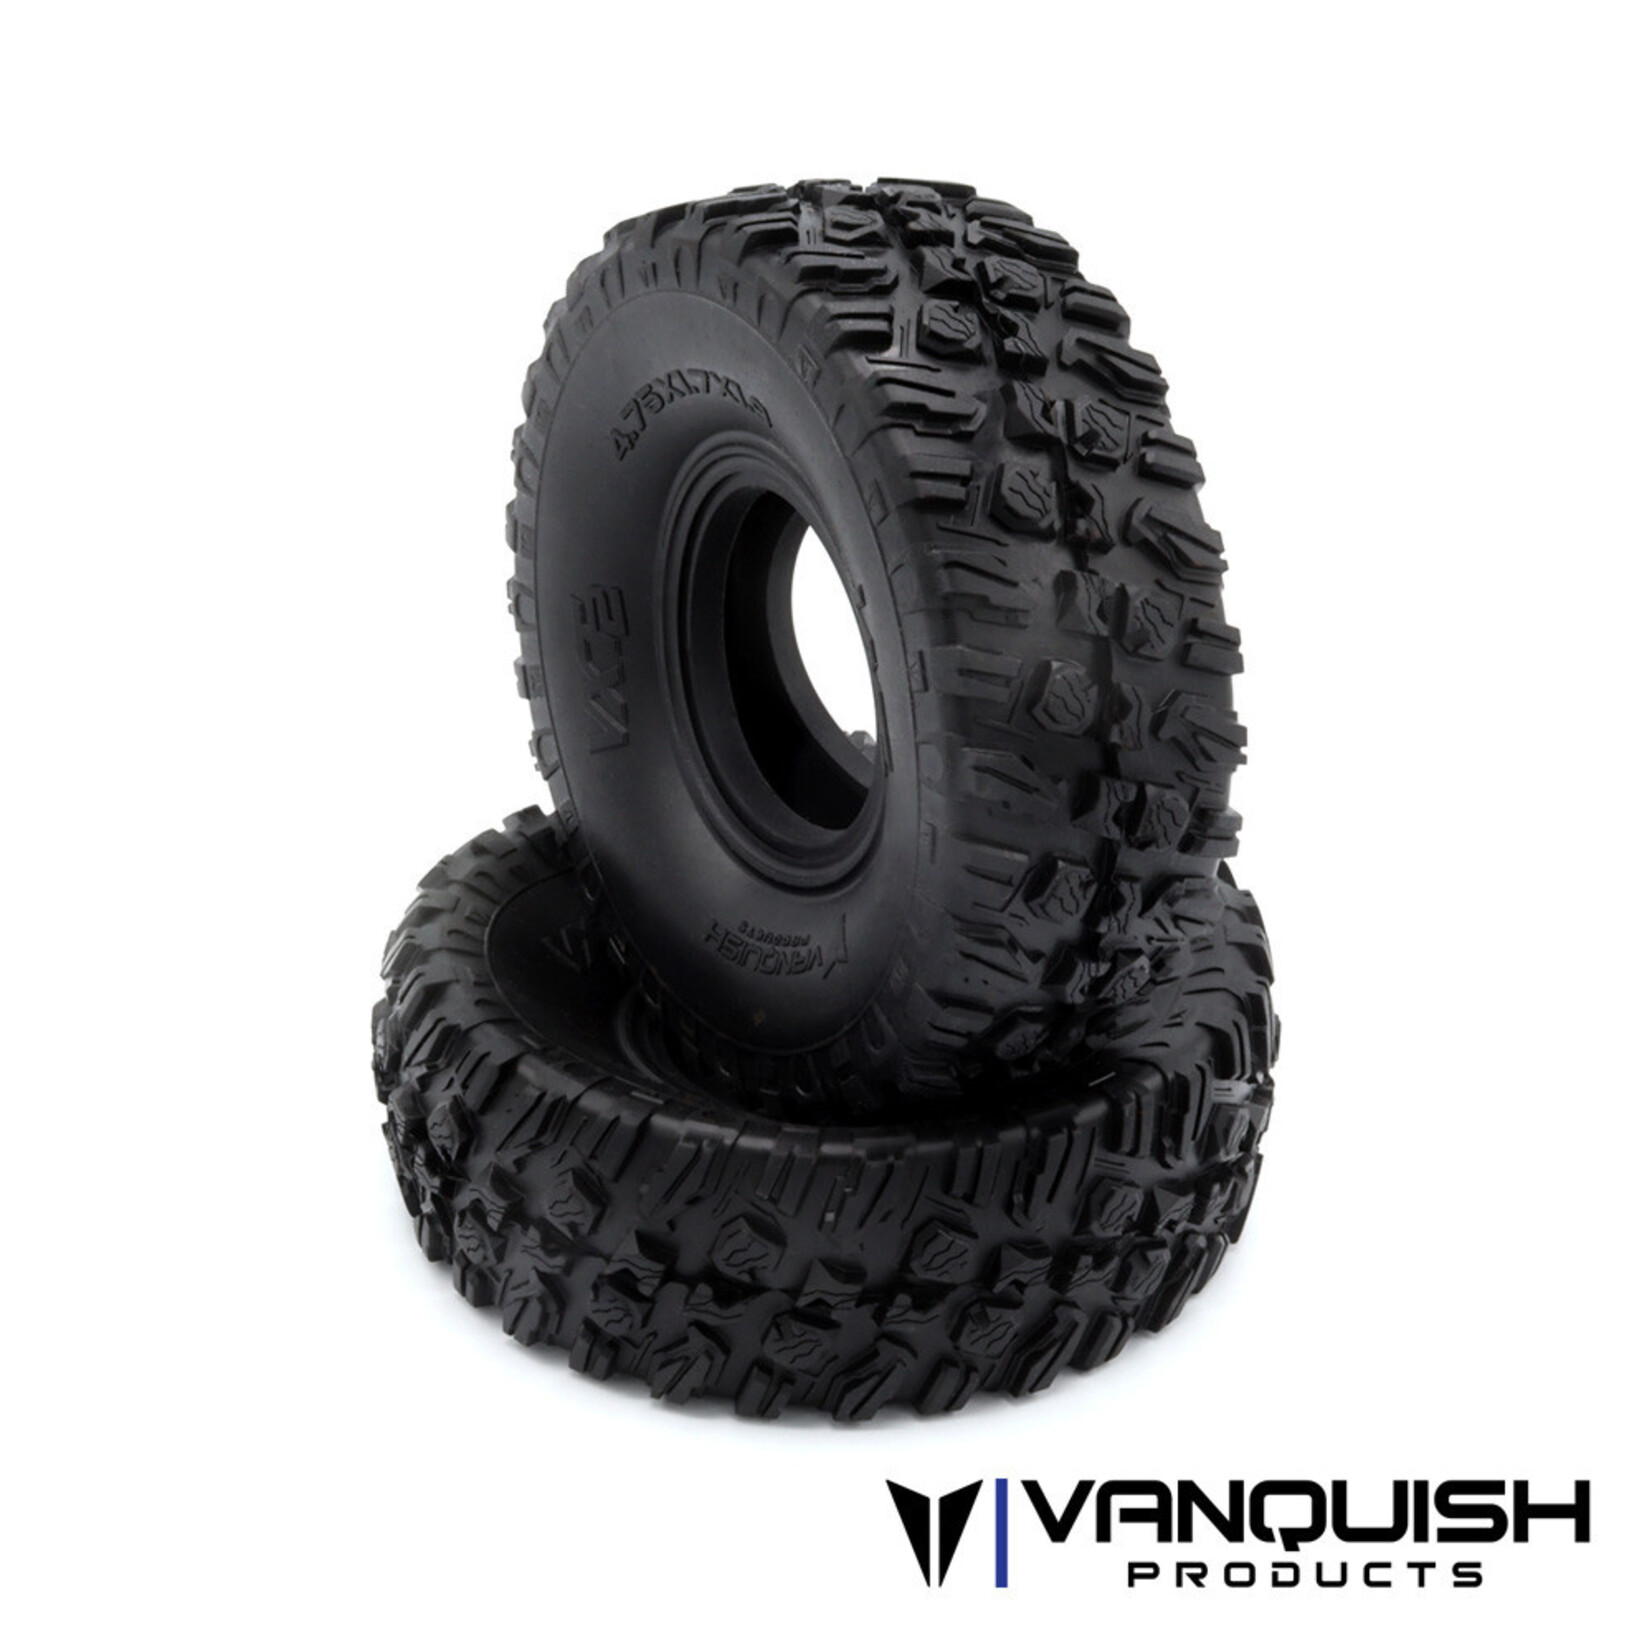 Vanquish Products VXT2 1.9" Rock Crawler Tires (2) (Red)